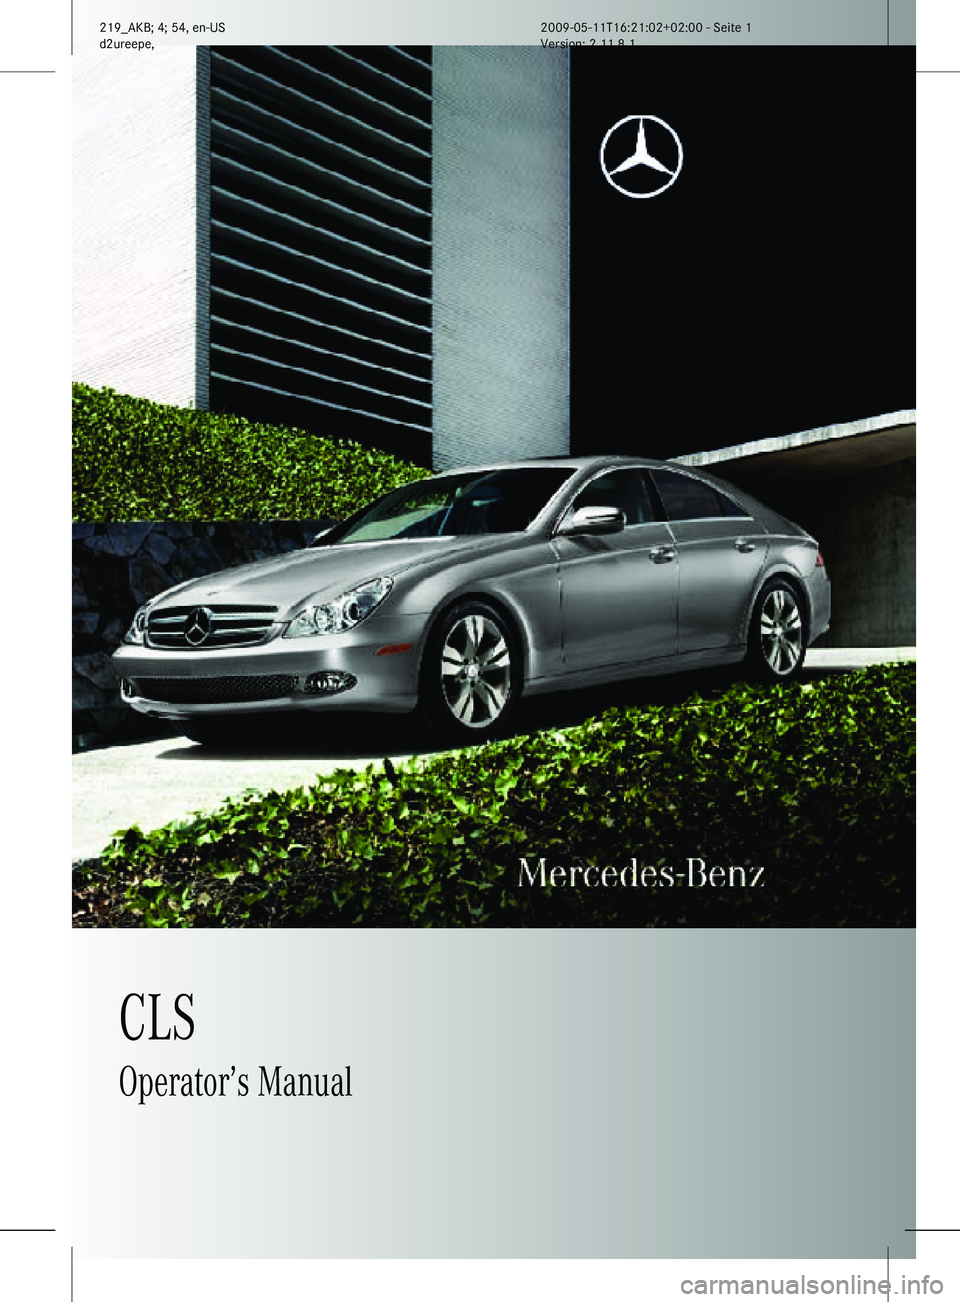 MERCEDES-BENZ CLS 2011  Owners Manual CLS
Operator’s Manual
219_AKB; 4; 54, en-US
d2ureepe,Version: 2.11.8.1 2009-05-11T16:21:02+02:00 - Seite 1    